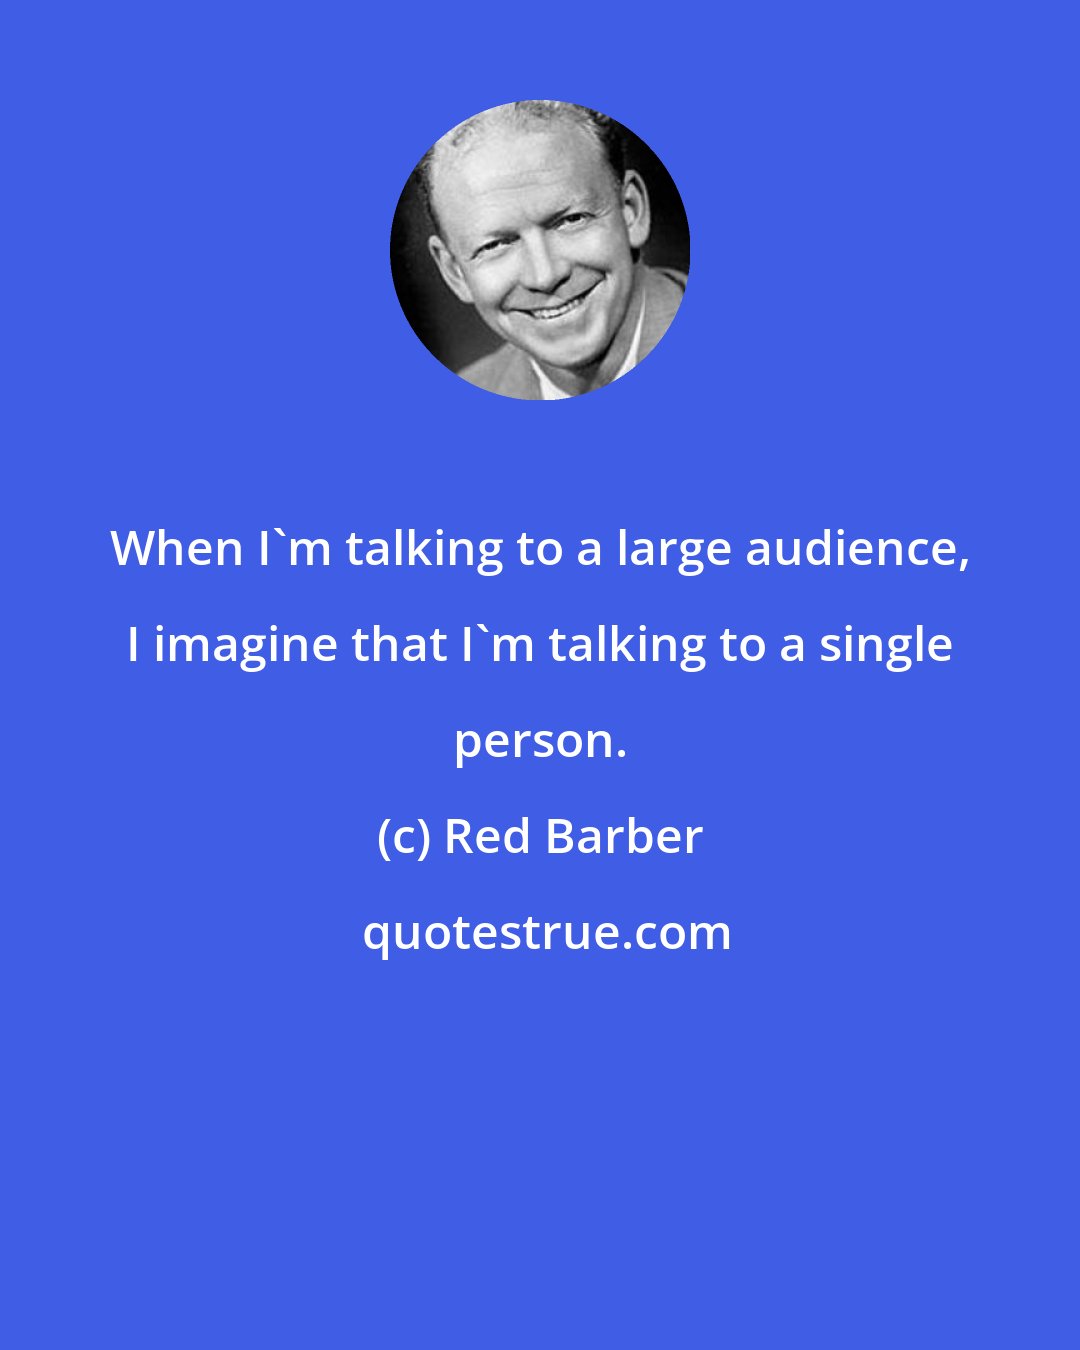 Red Barber: When I'm talking to a large audience, I imagine that I'm talking to a single person.